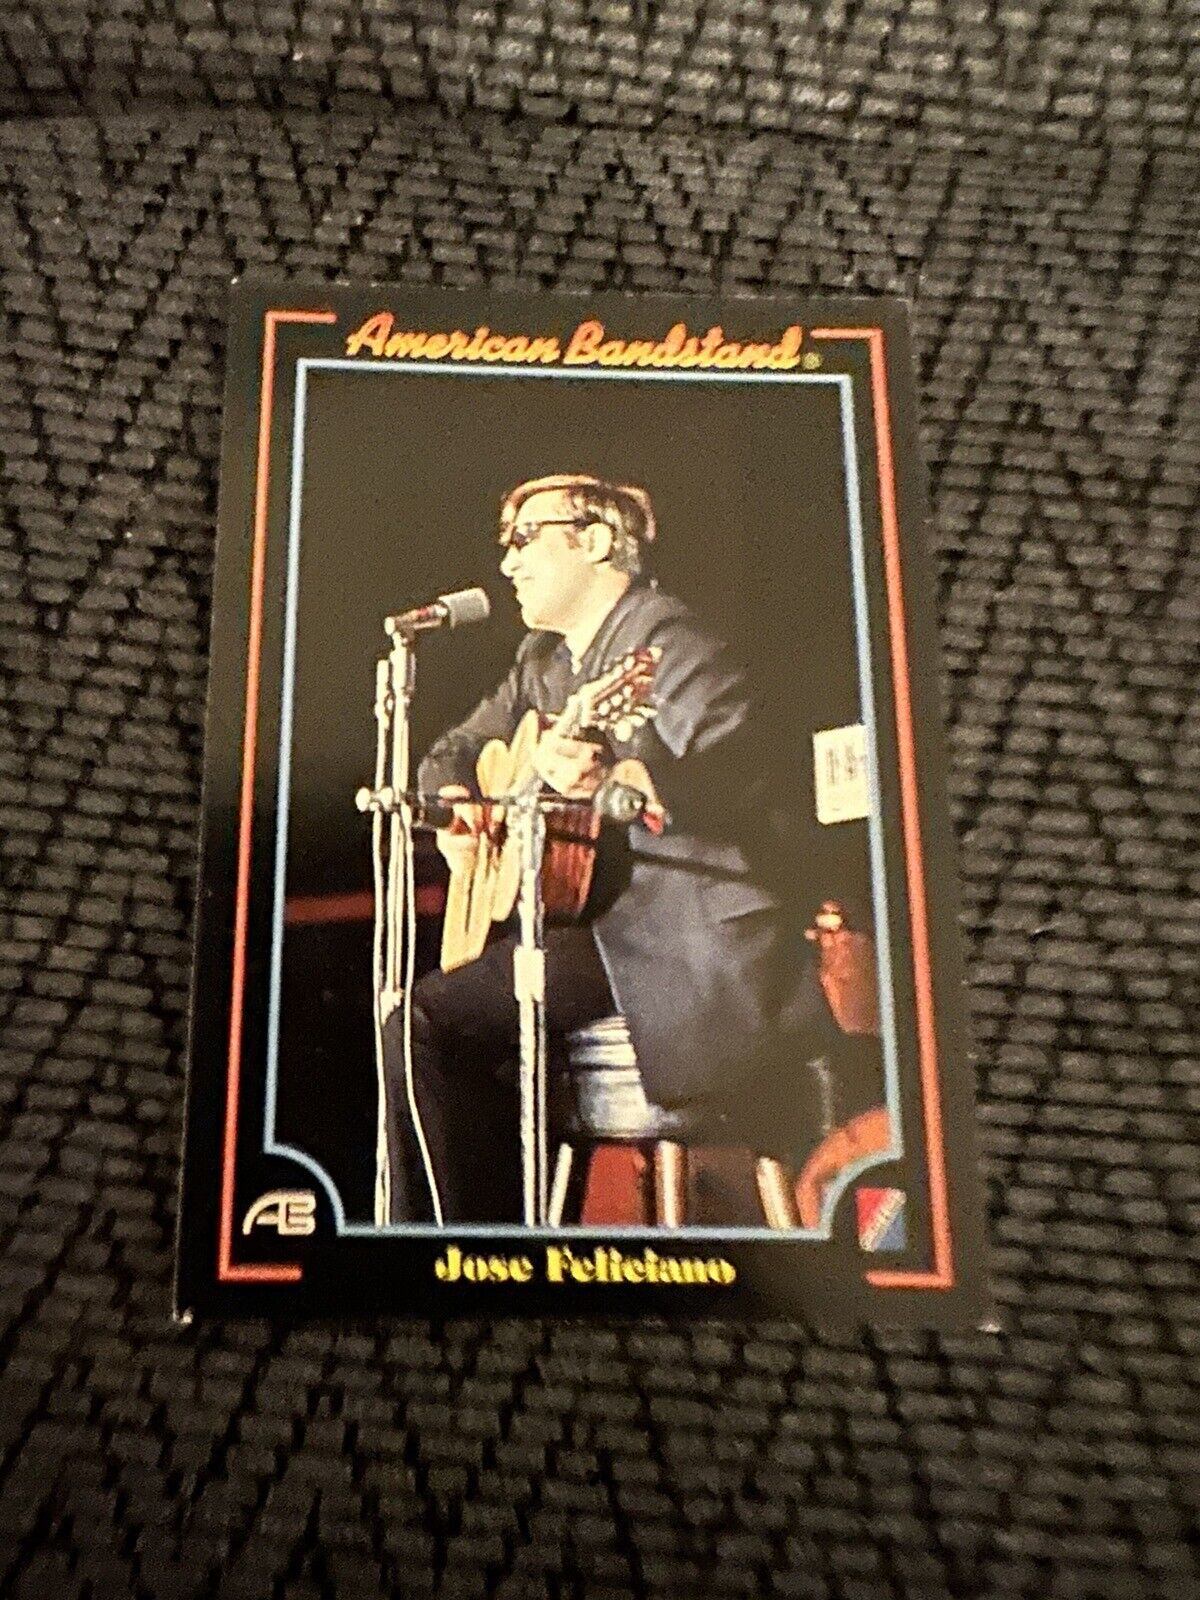 Jose Feliciano Signed Trading Card Autographed American Bandstand Back Side